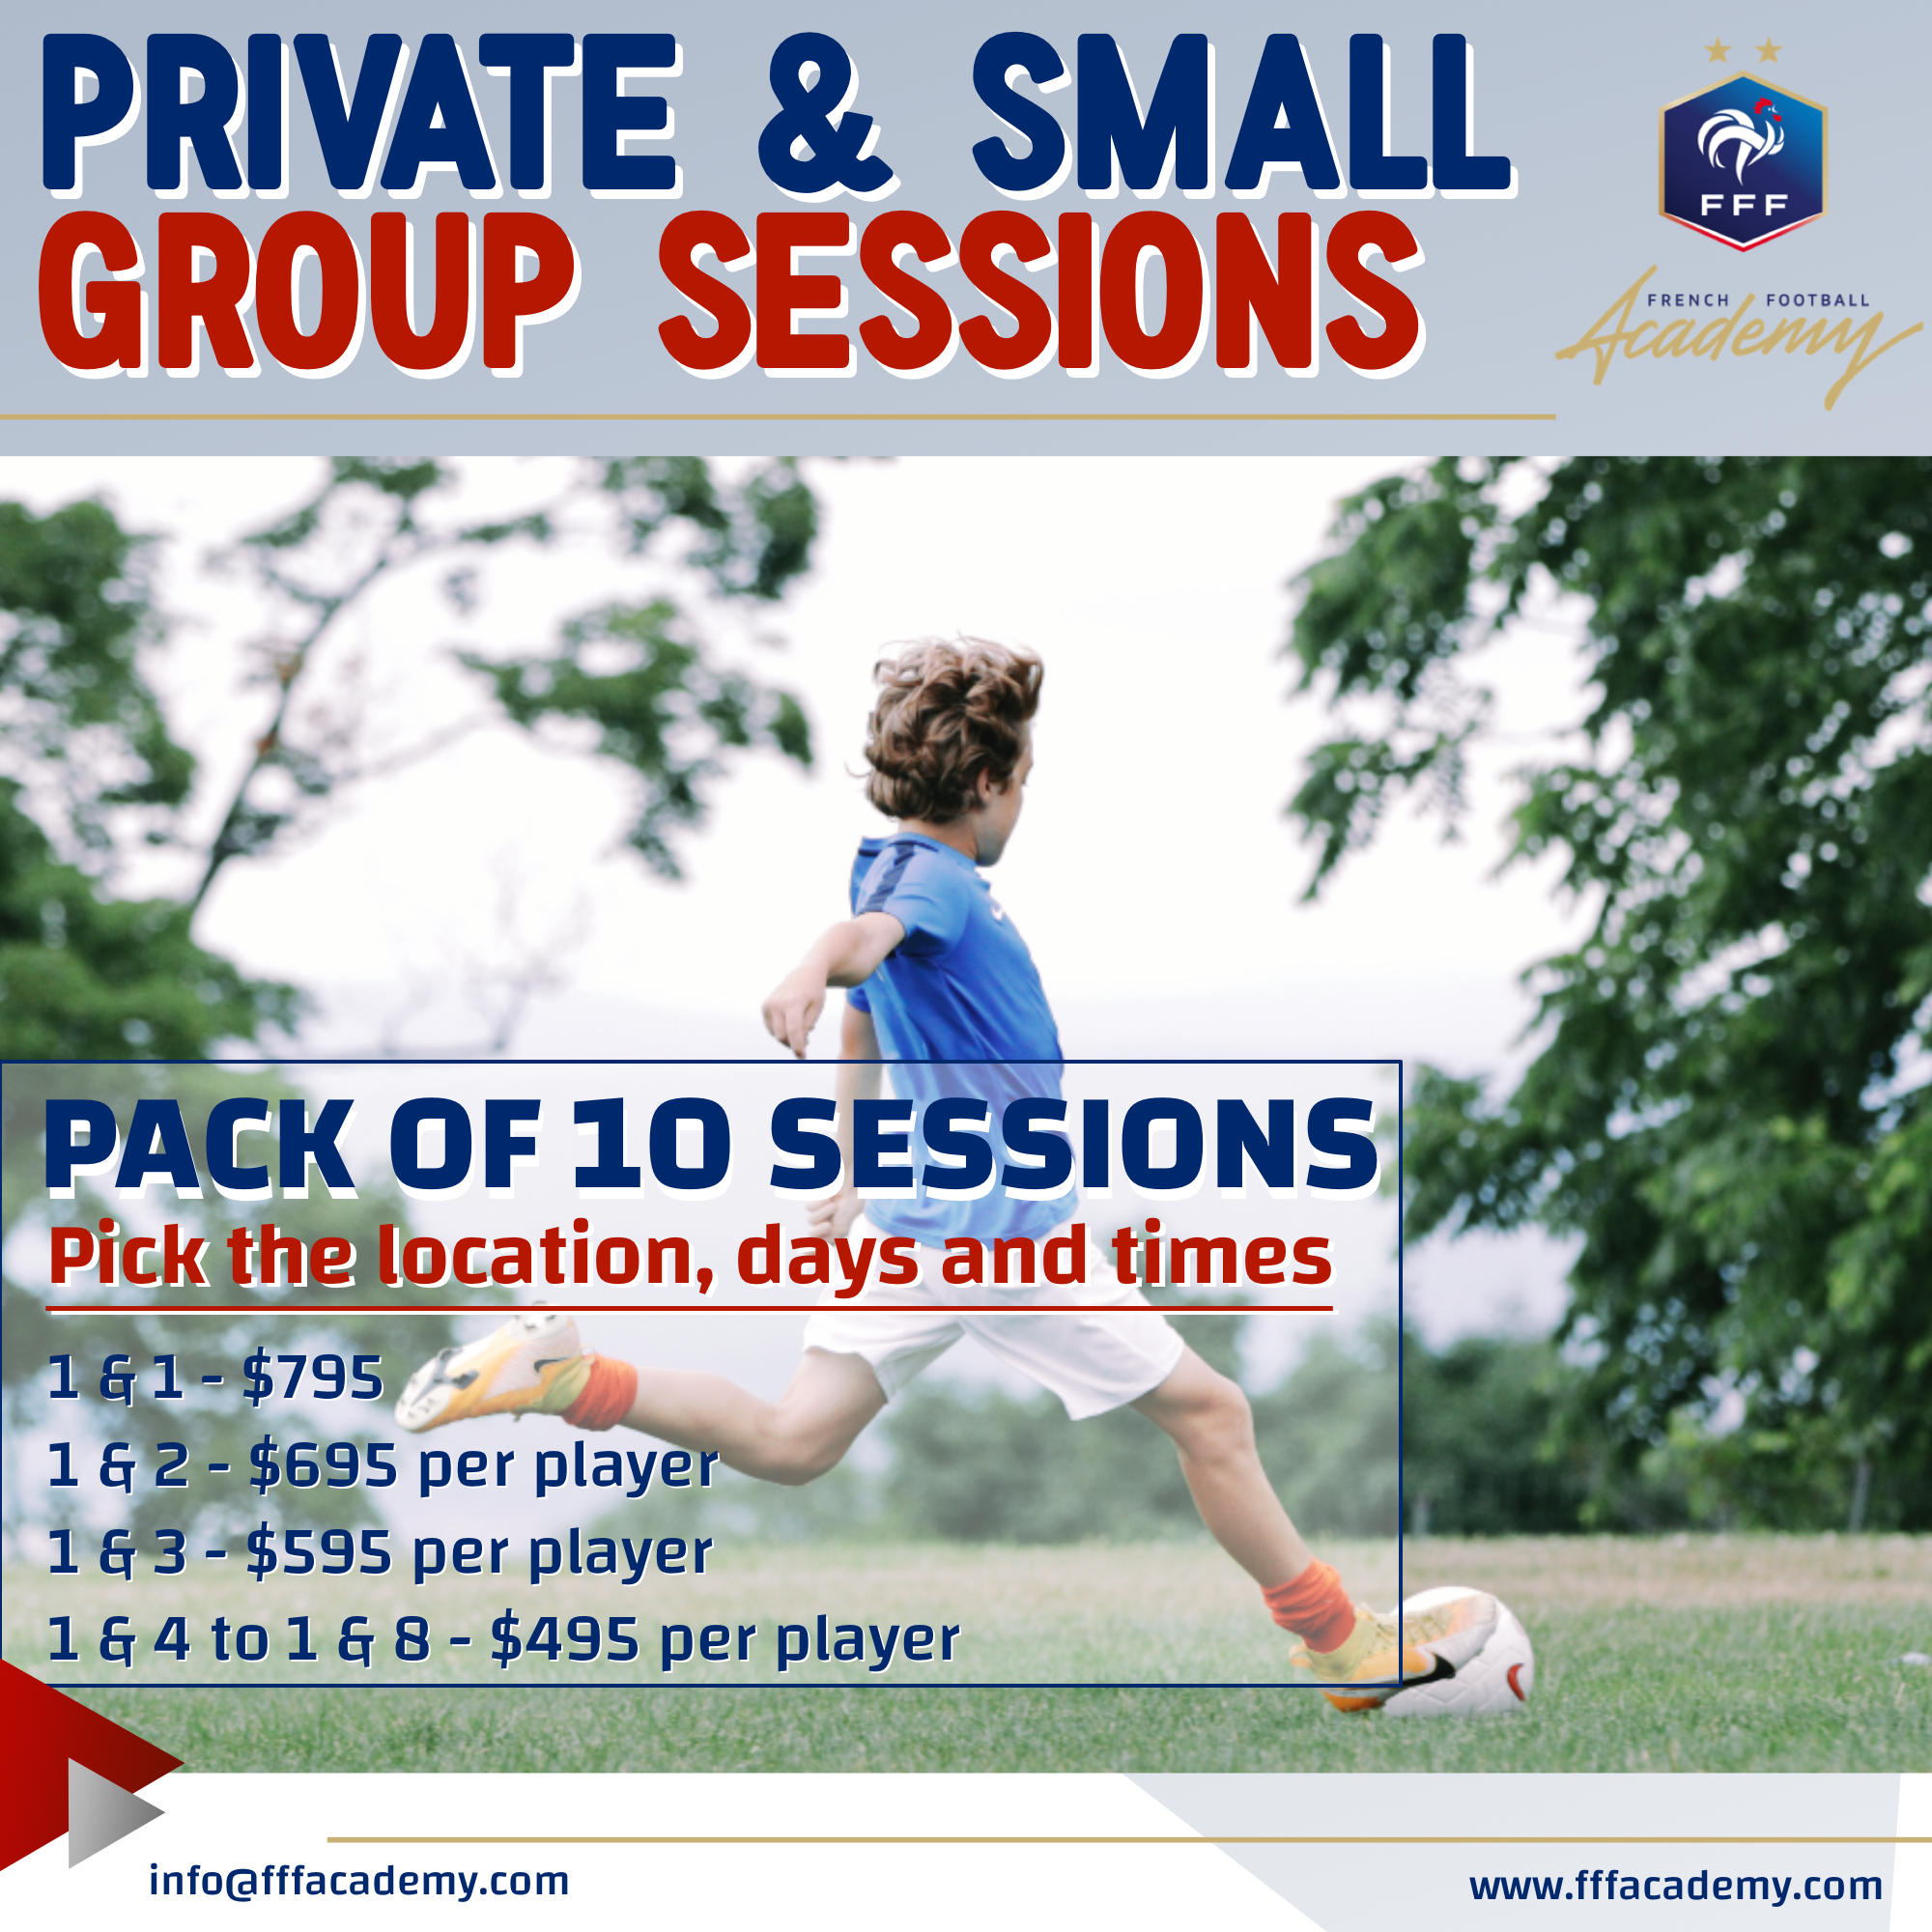 FFA - Private & Small group sessions